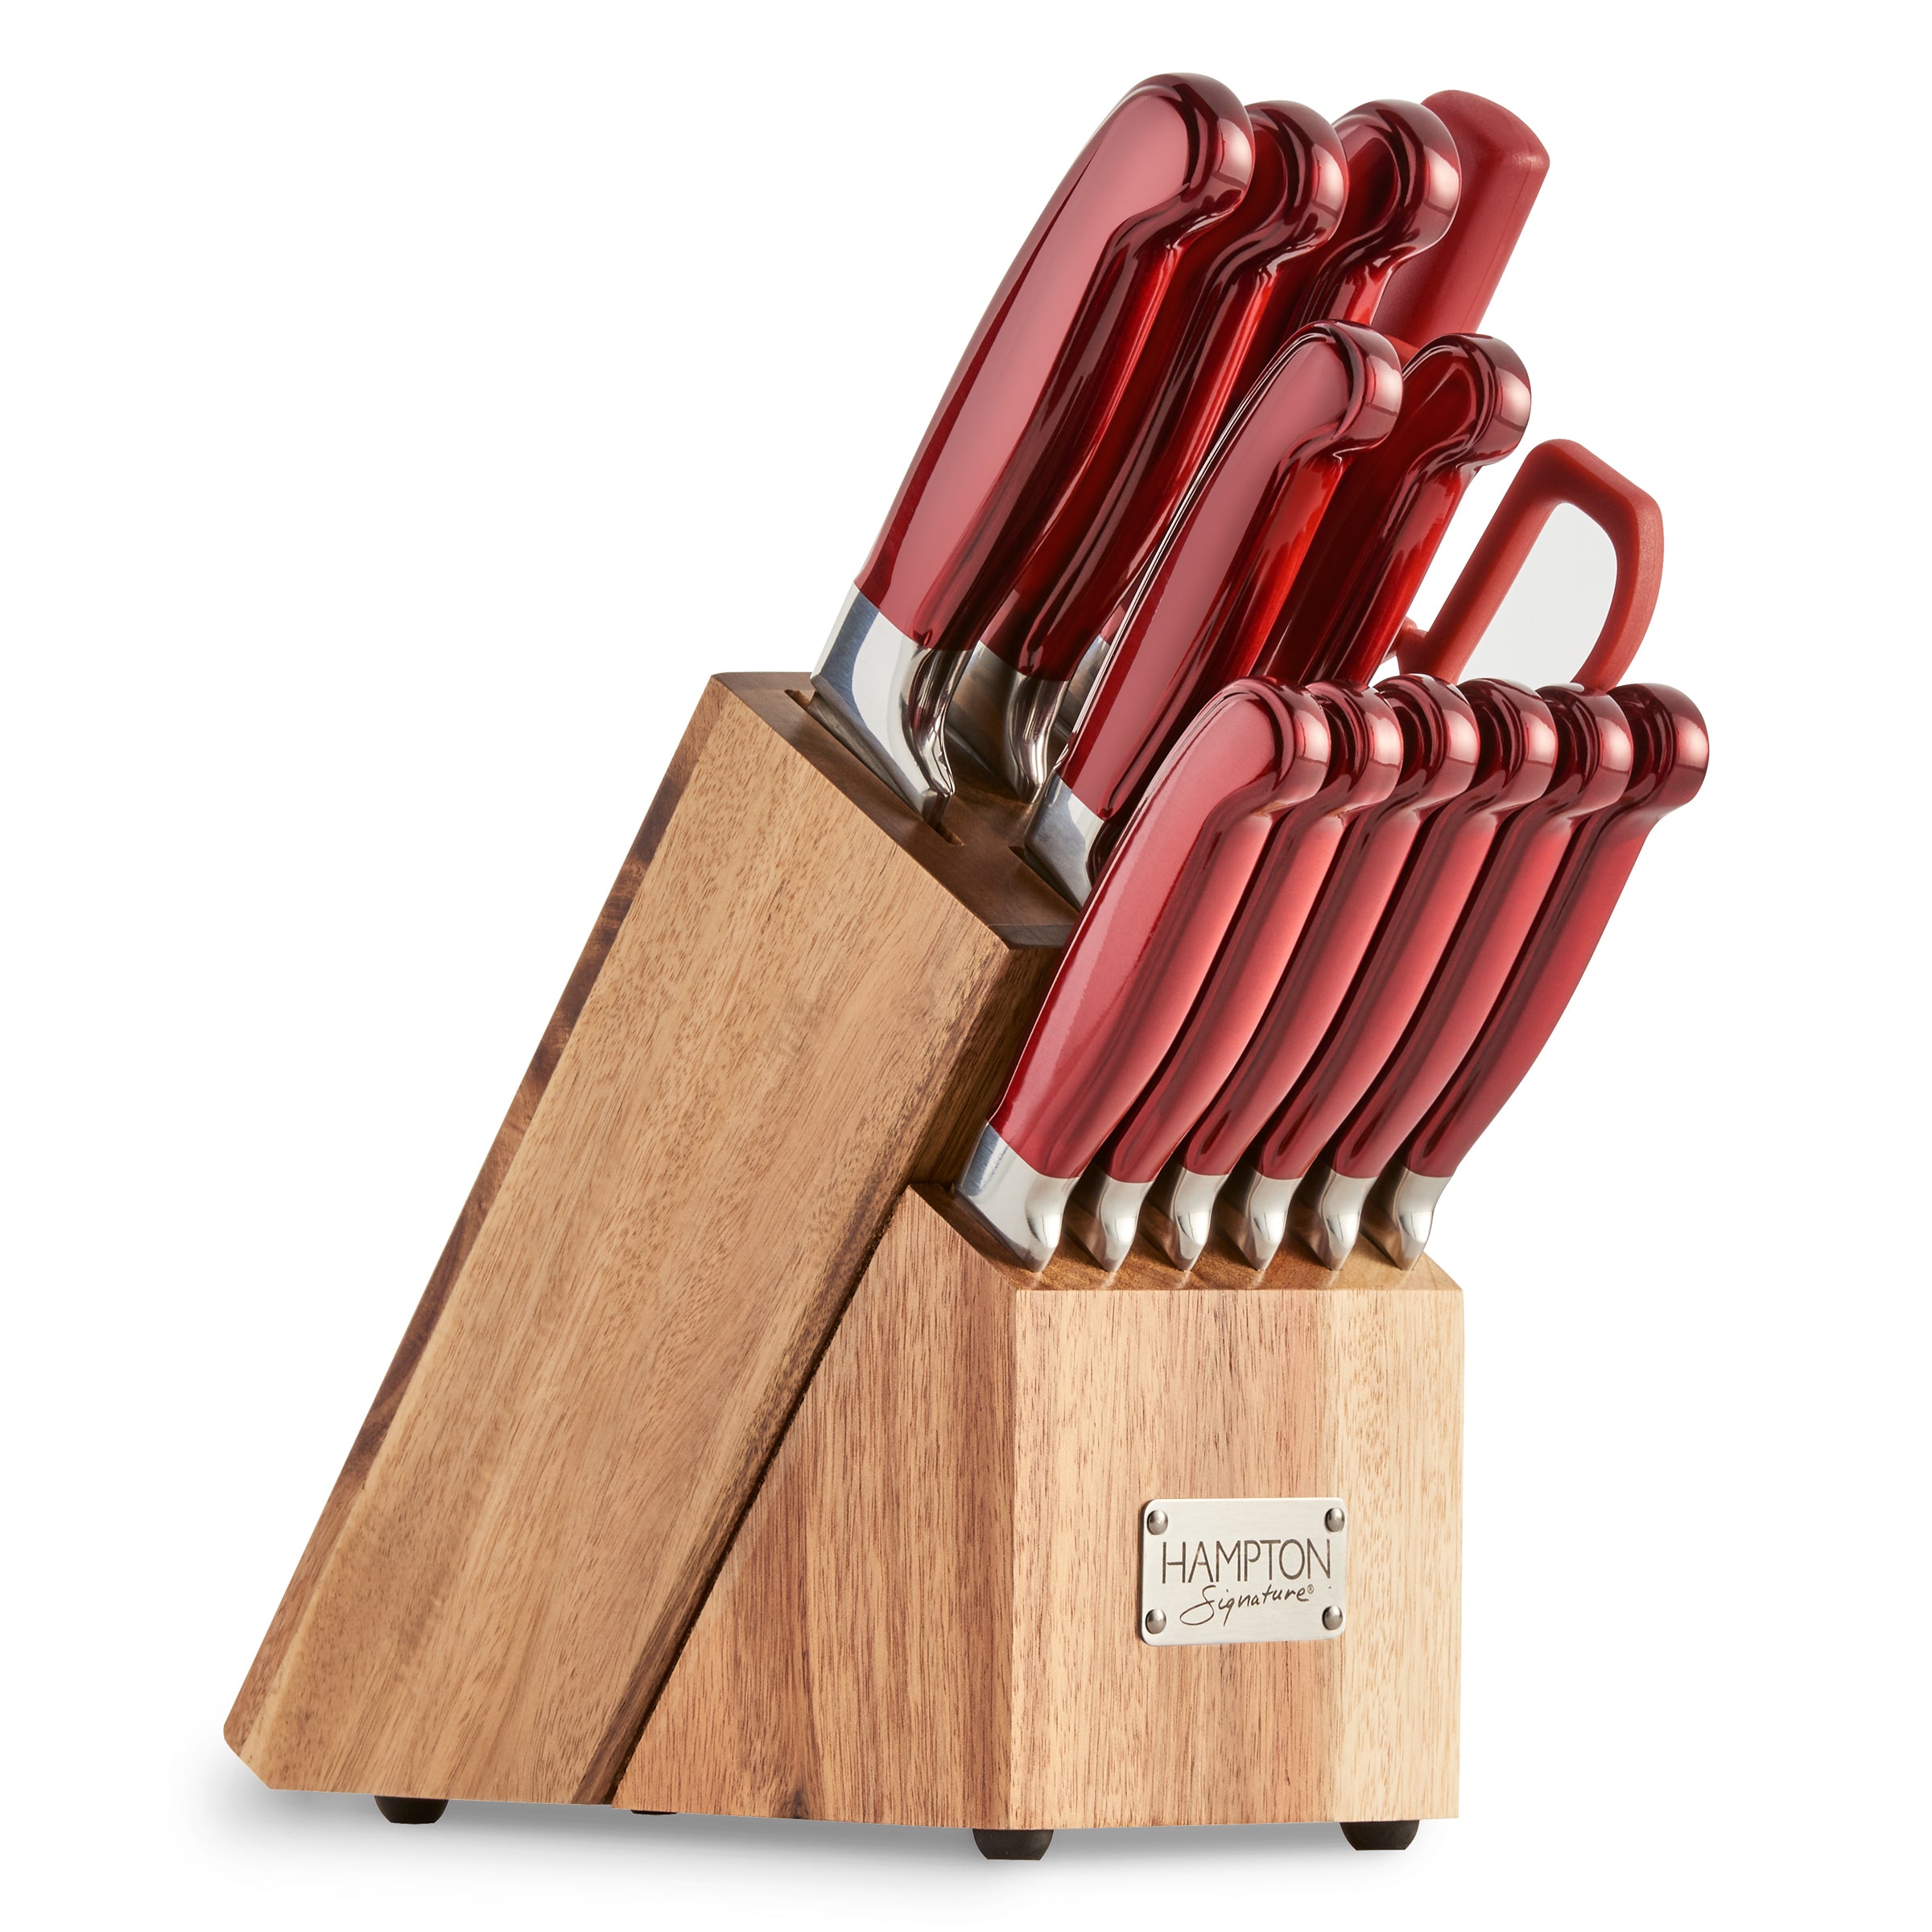 Smokin' and Grillin' with AB Signature Magnetic Knife Block